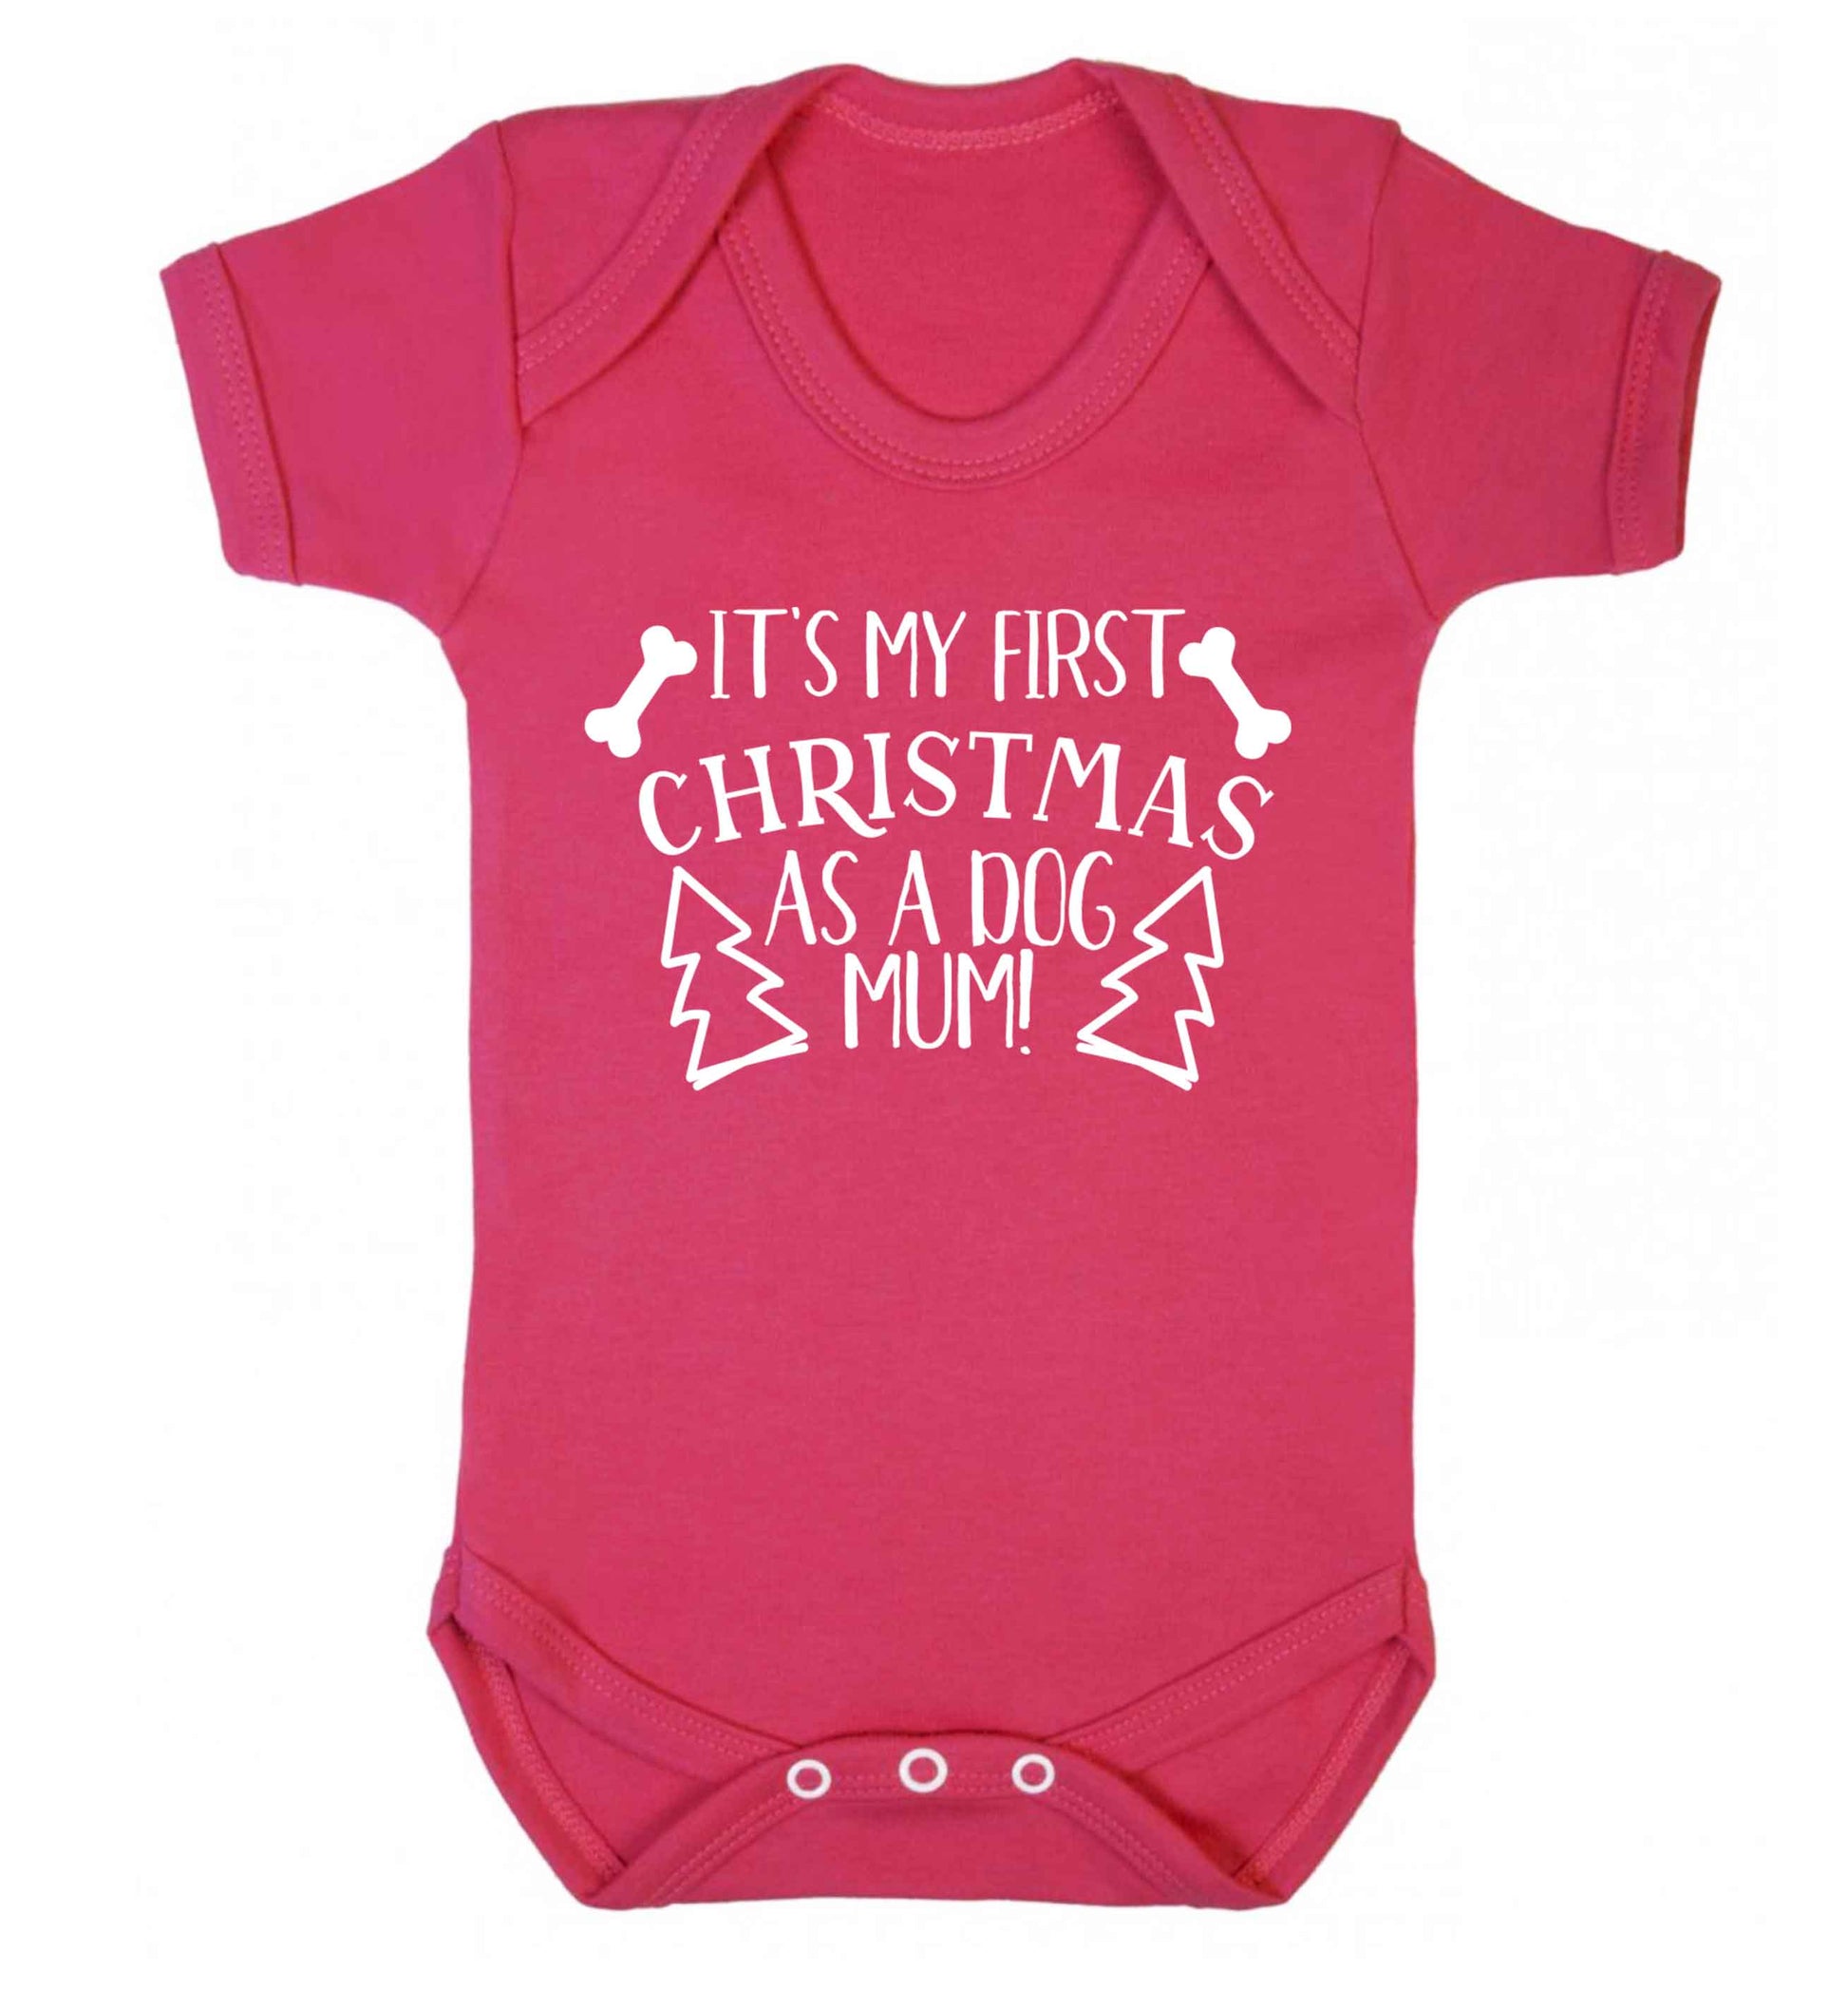 It's my first Christmas as a dog mum! Baby Vest dark pink 18-24 months